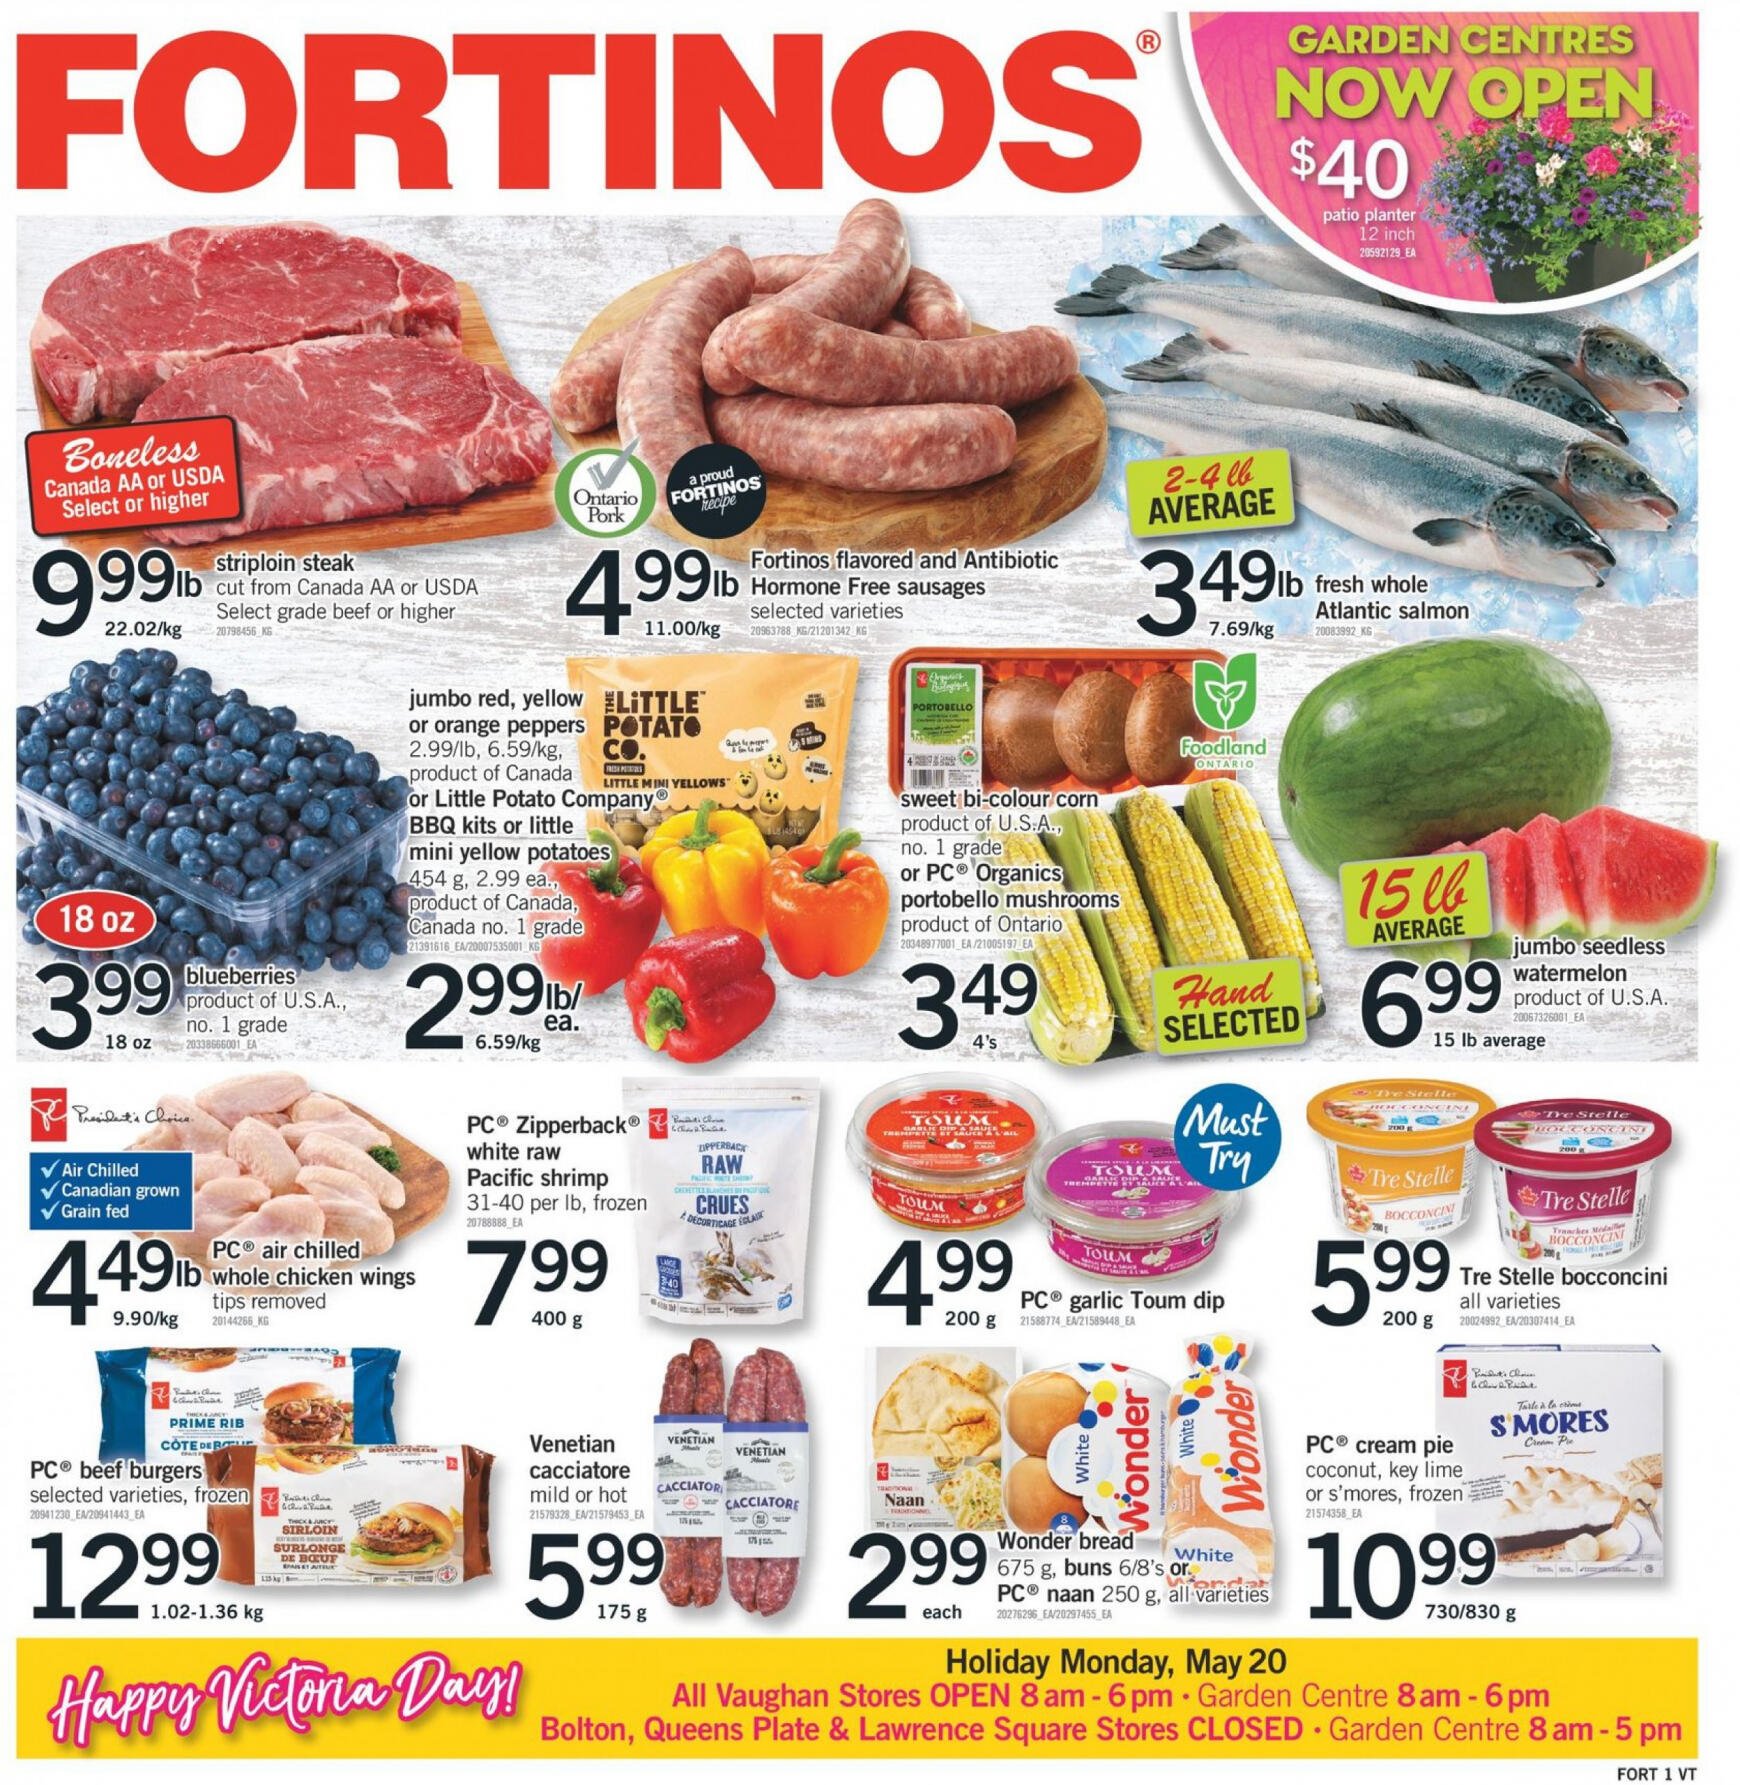 fortinos - Fortinos flyer current 16.05. - 22.05.